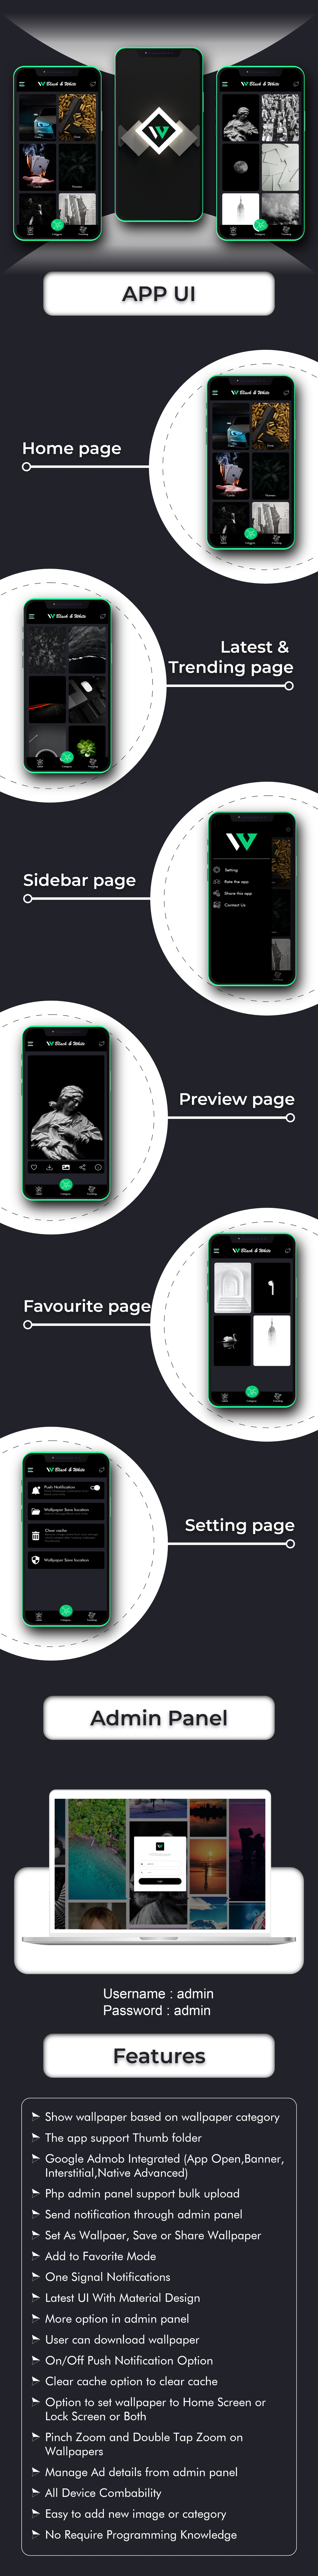 Black and White Wallpaper with Admin Panel + Google Admob - 1